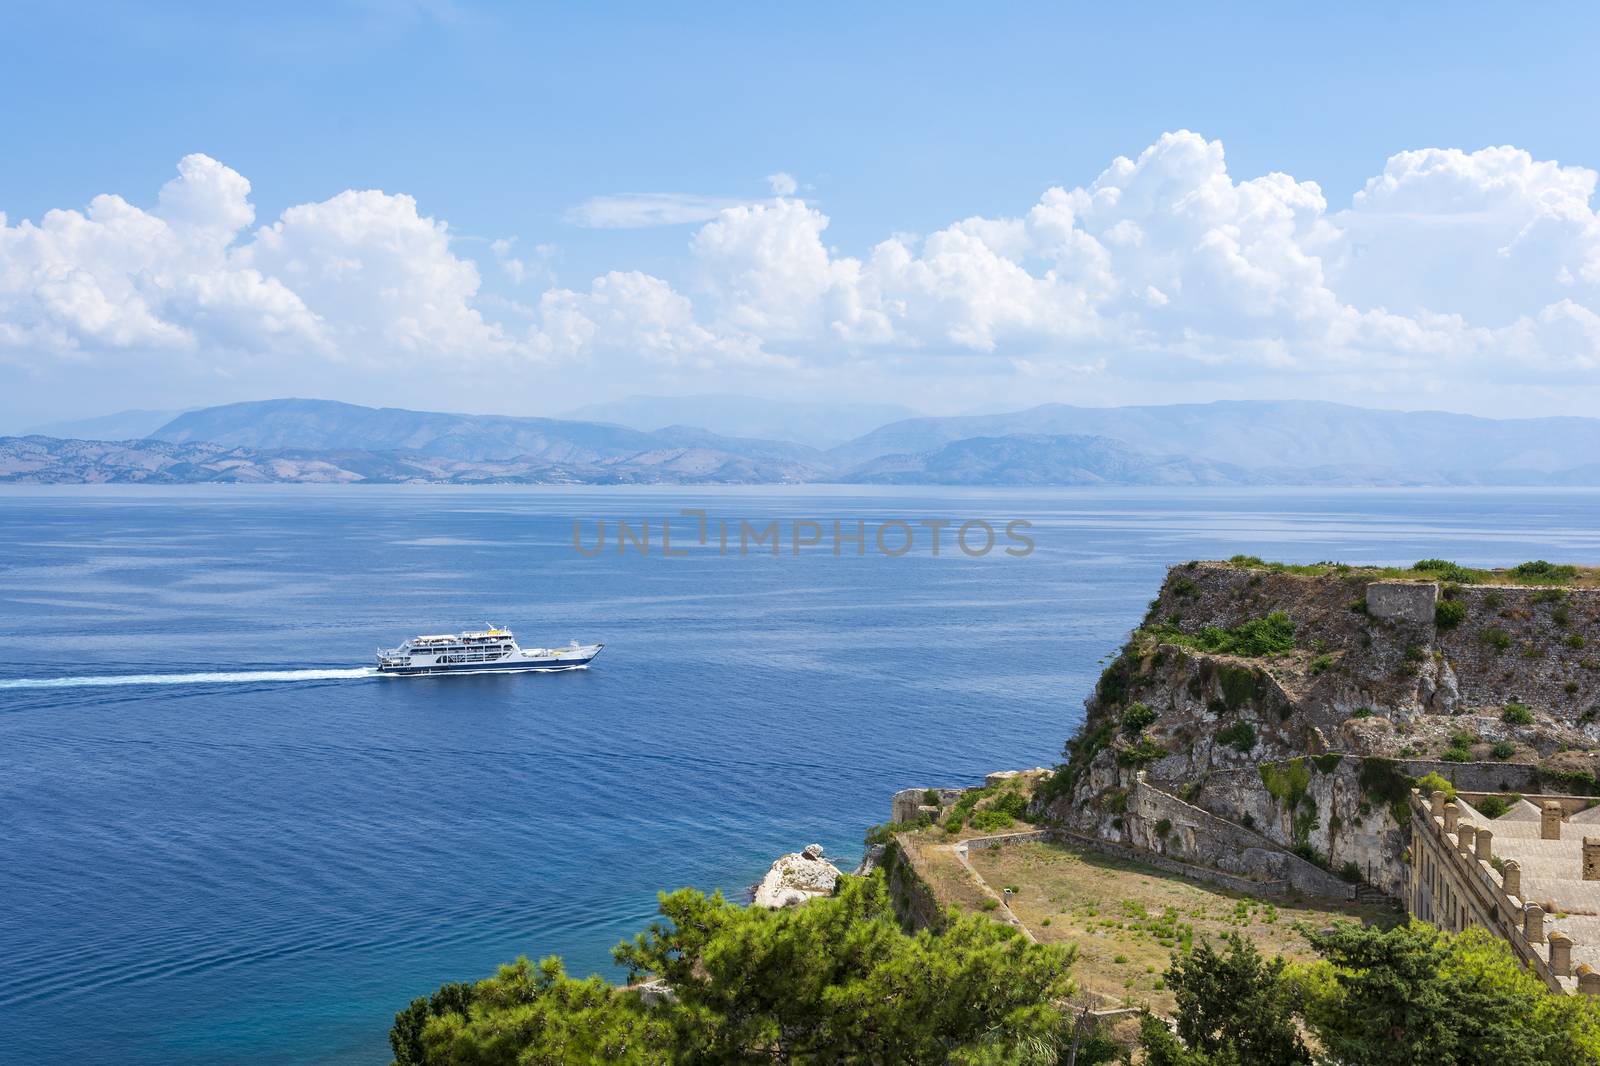 View of Corfu old fortress - Greece